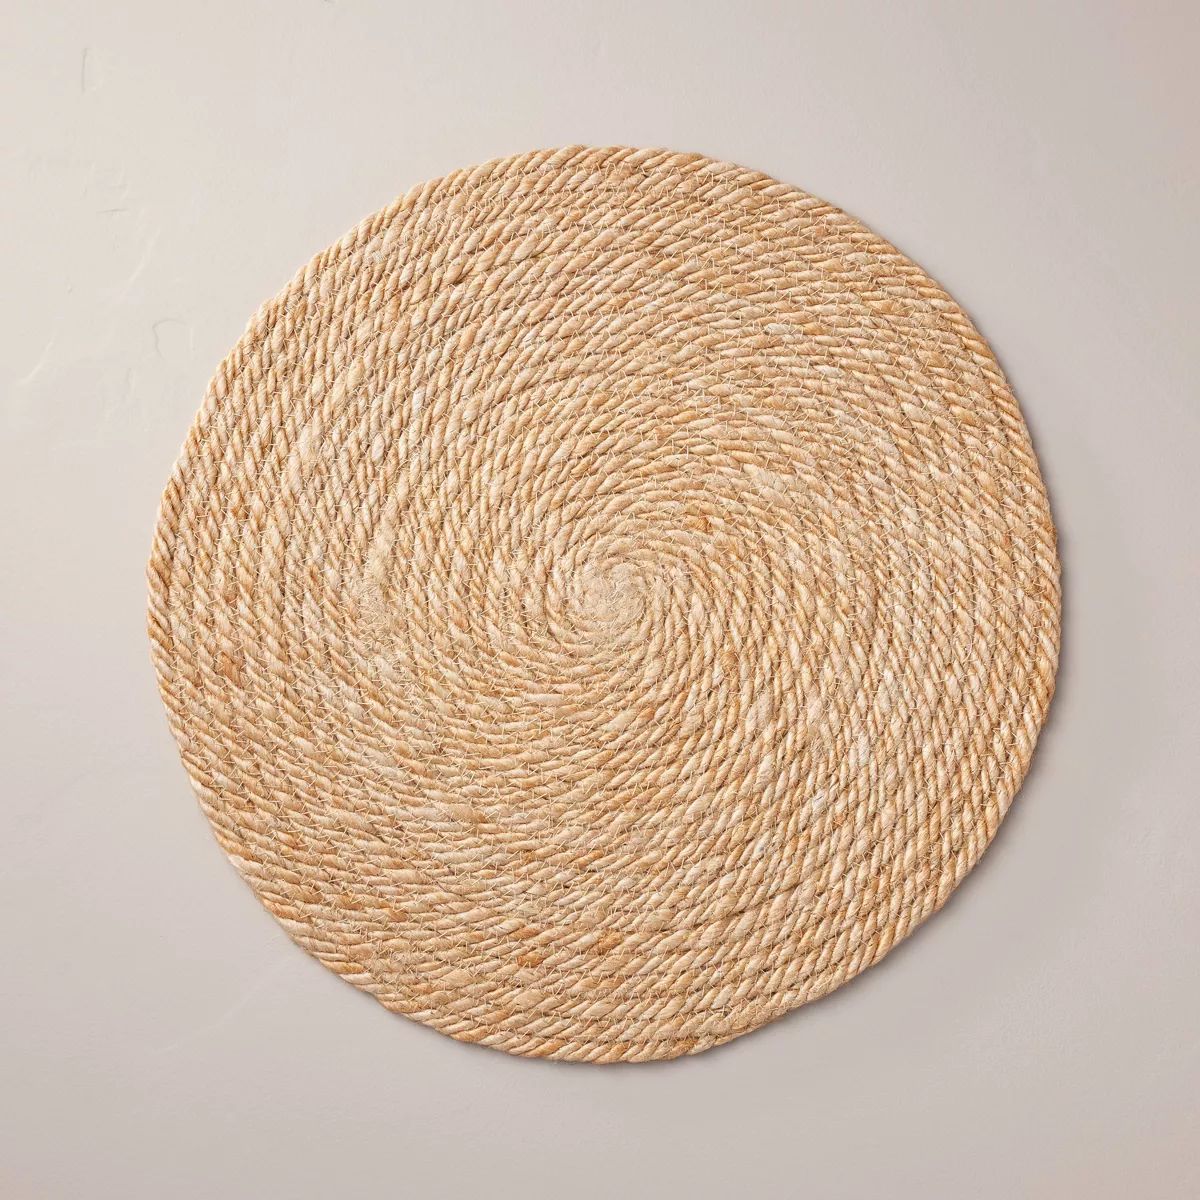 15" Natural Jute Coiled Charger Placemat - Hearth & Hand™ with Magnolia | Target